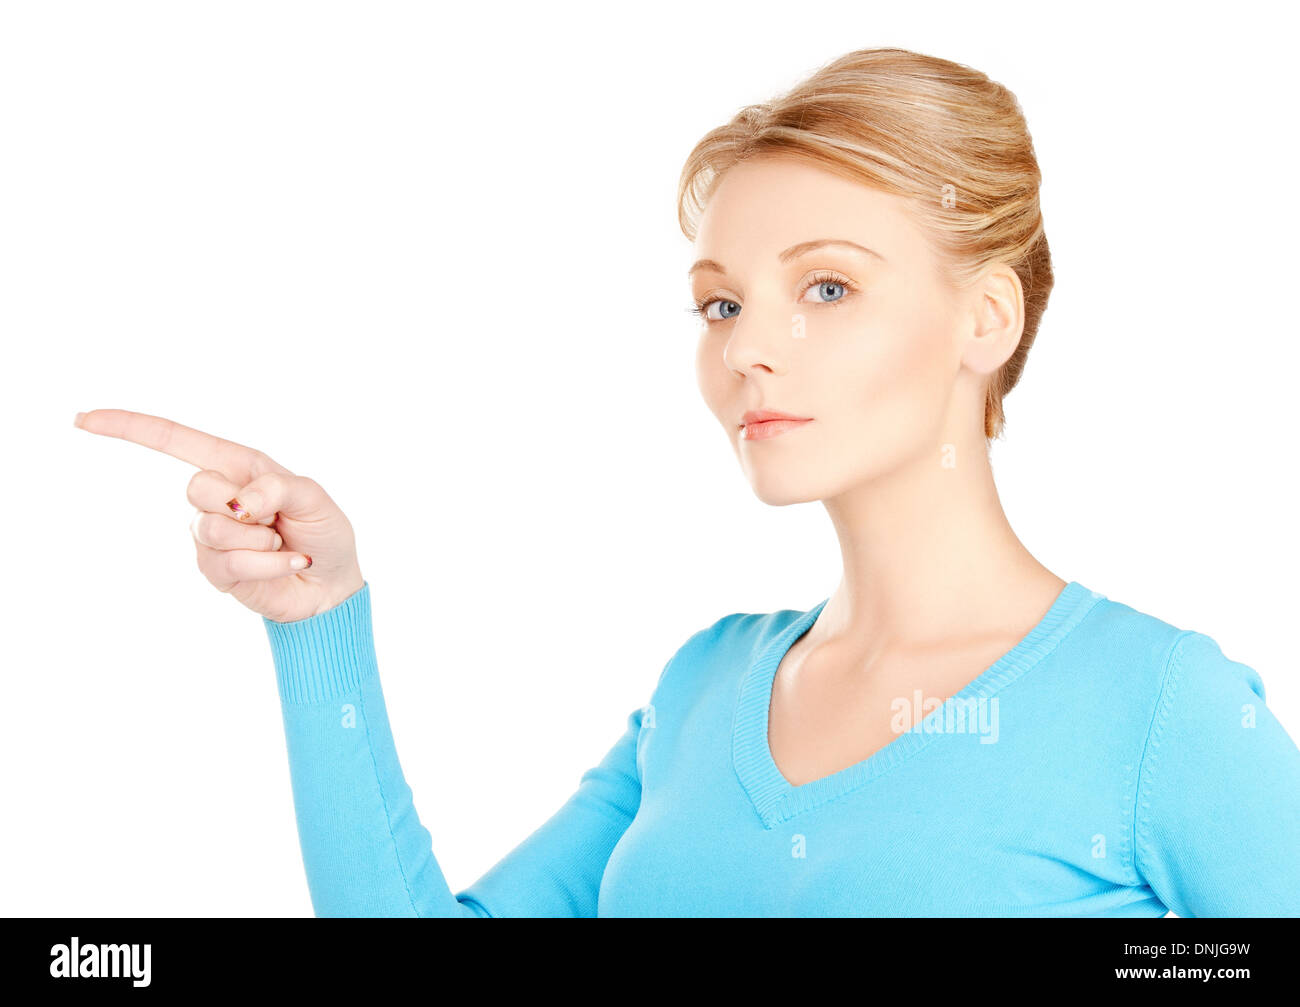 businesswoman pointing her finger Stock Photo